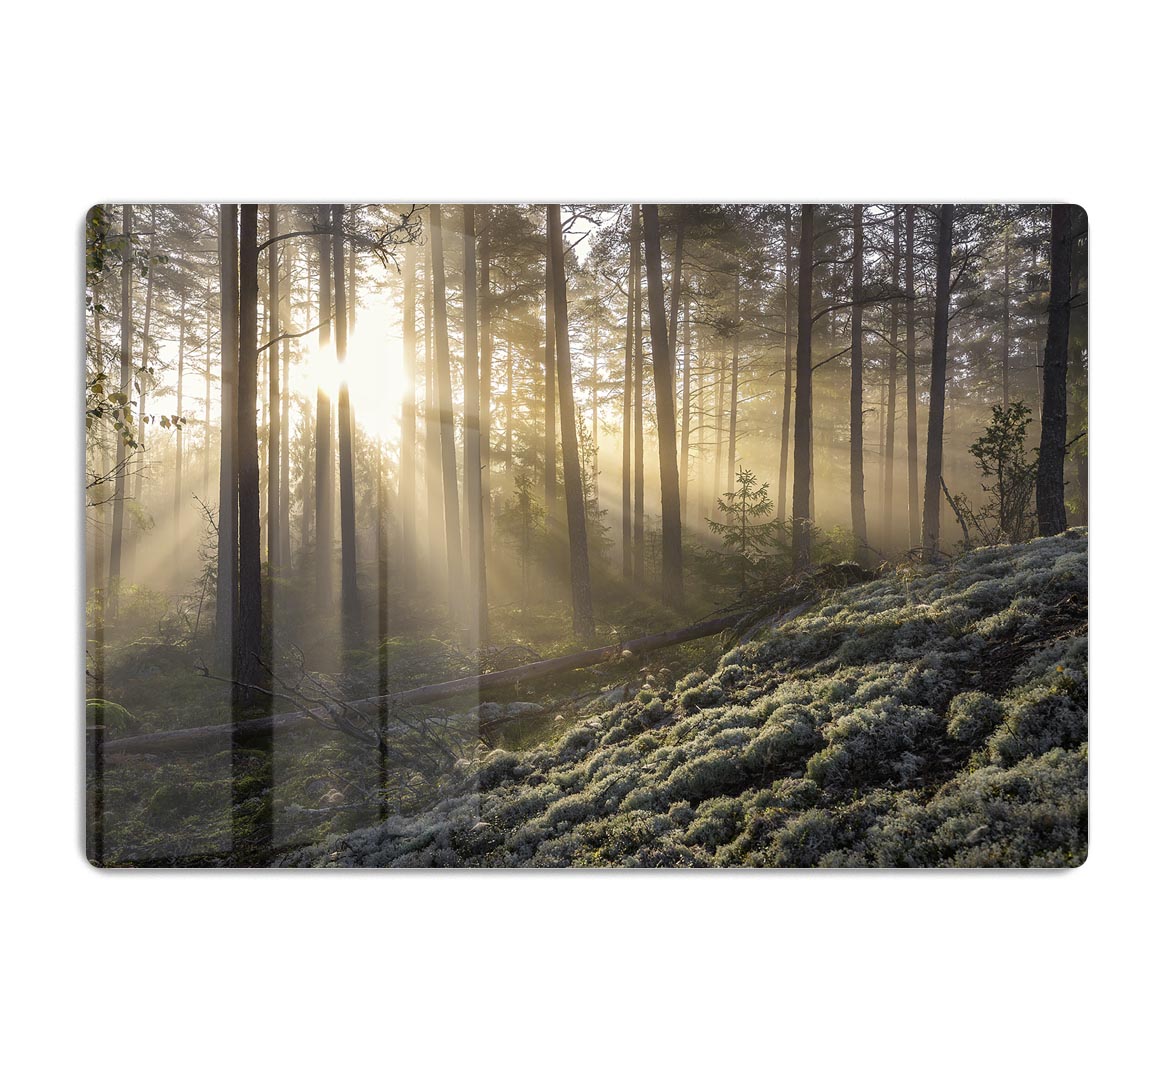 Fog In The Forest With White Moss In The Forground HD Metal Print - Canvas Art Rocks - 1